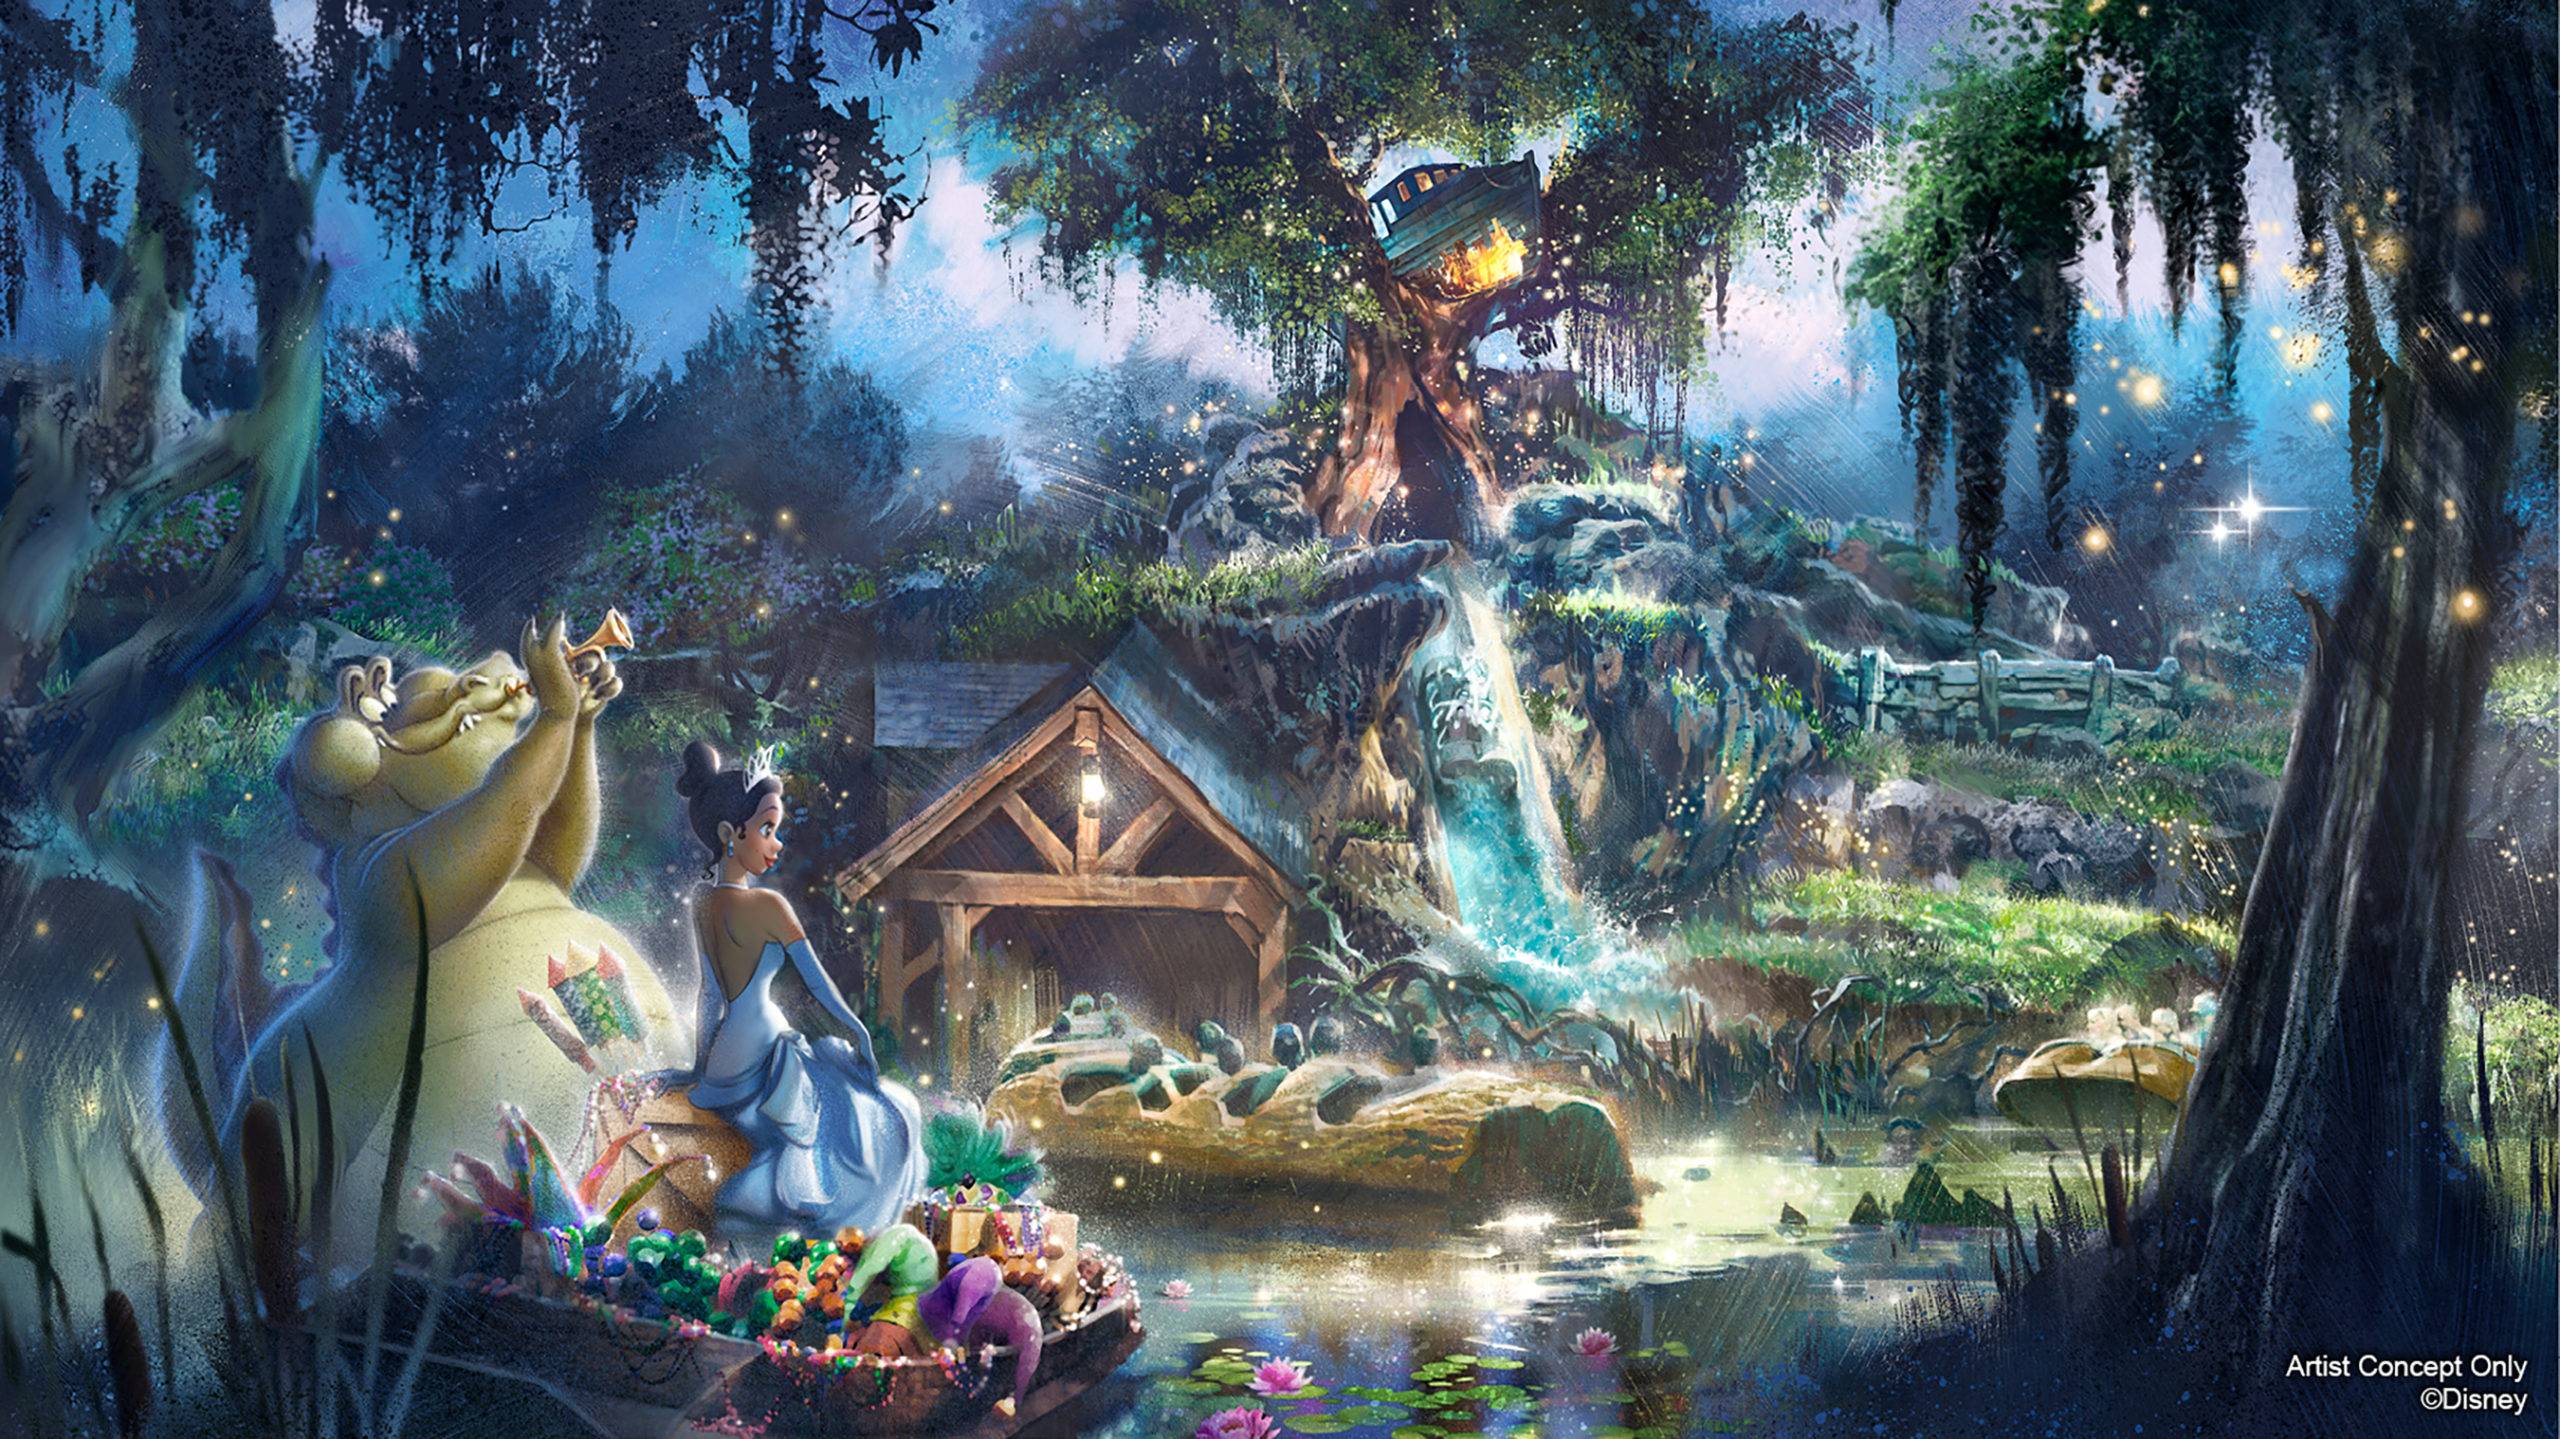 New concept art and details unveiled for the 'The Princess and the Frog' retheme of Splash Mountain